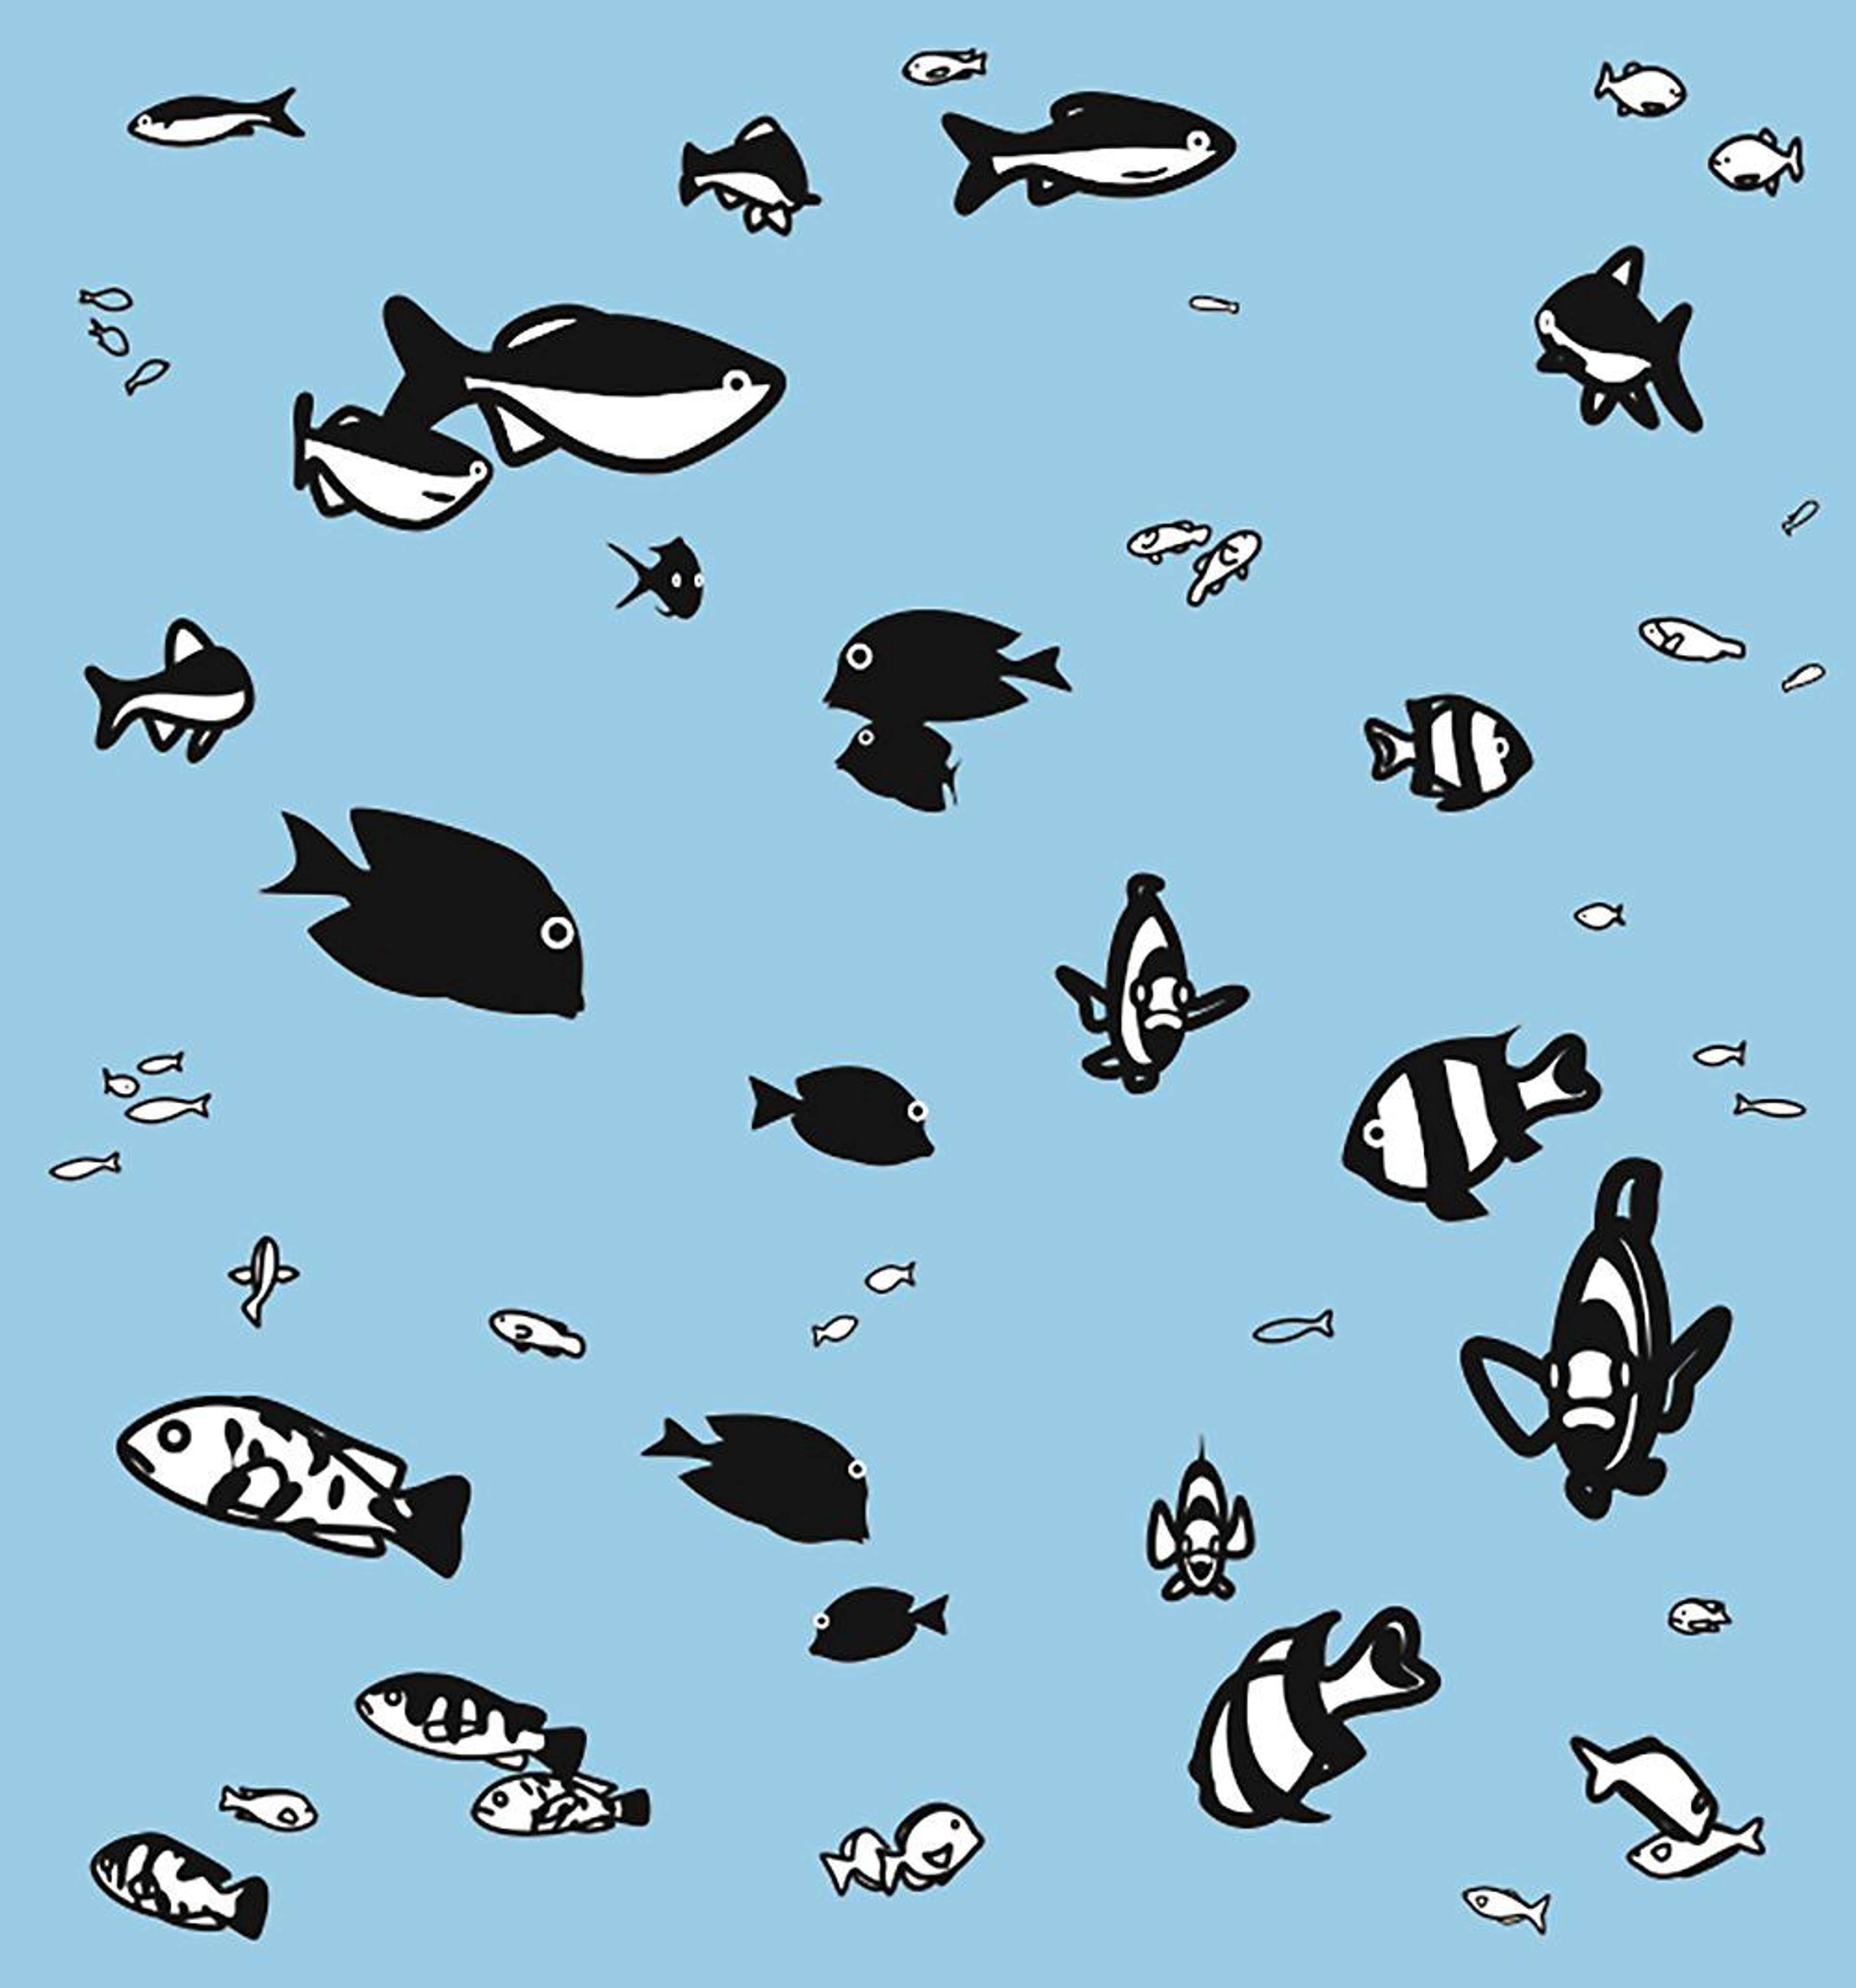 We Swam Amongst The Fishes 2 - Signed Print